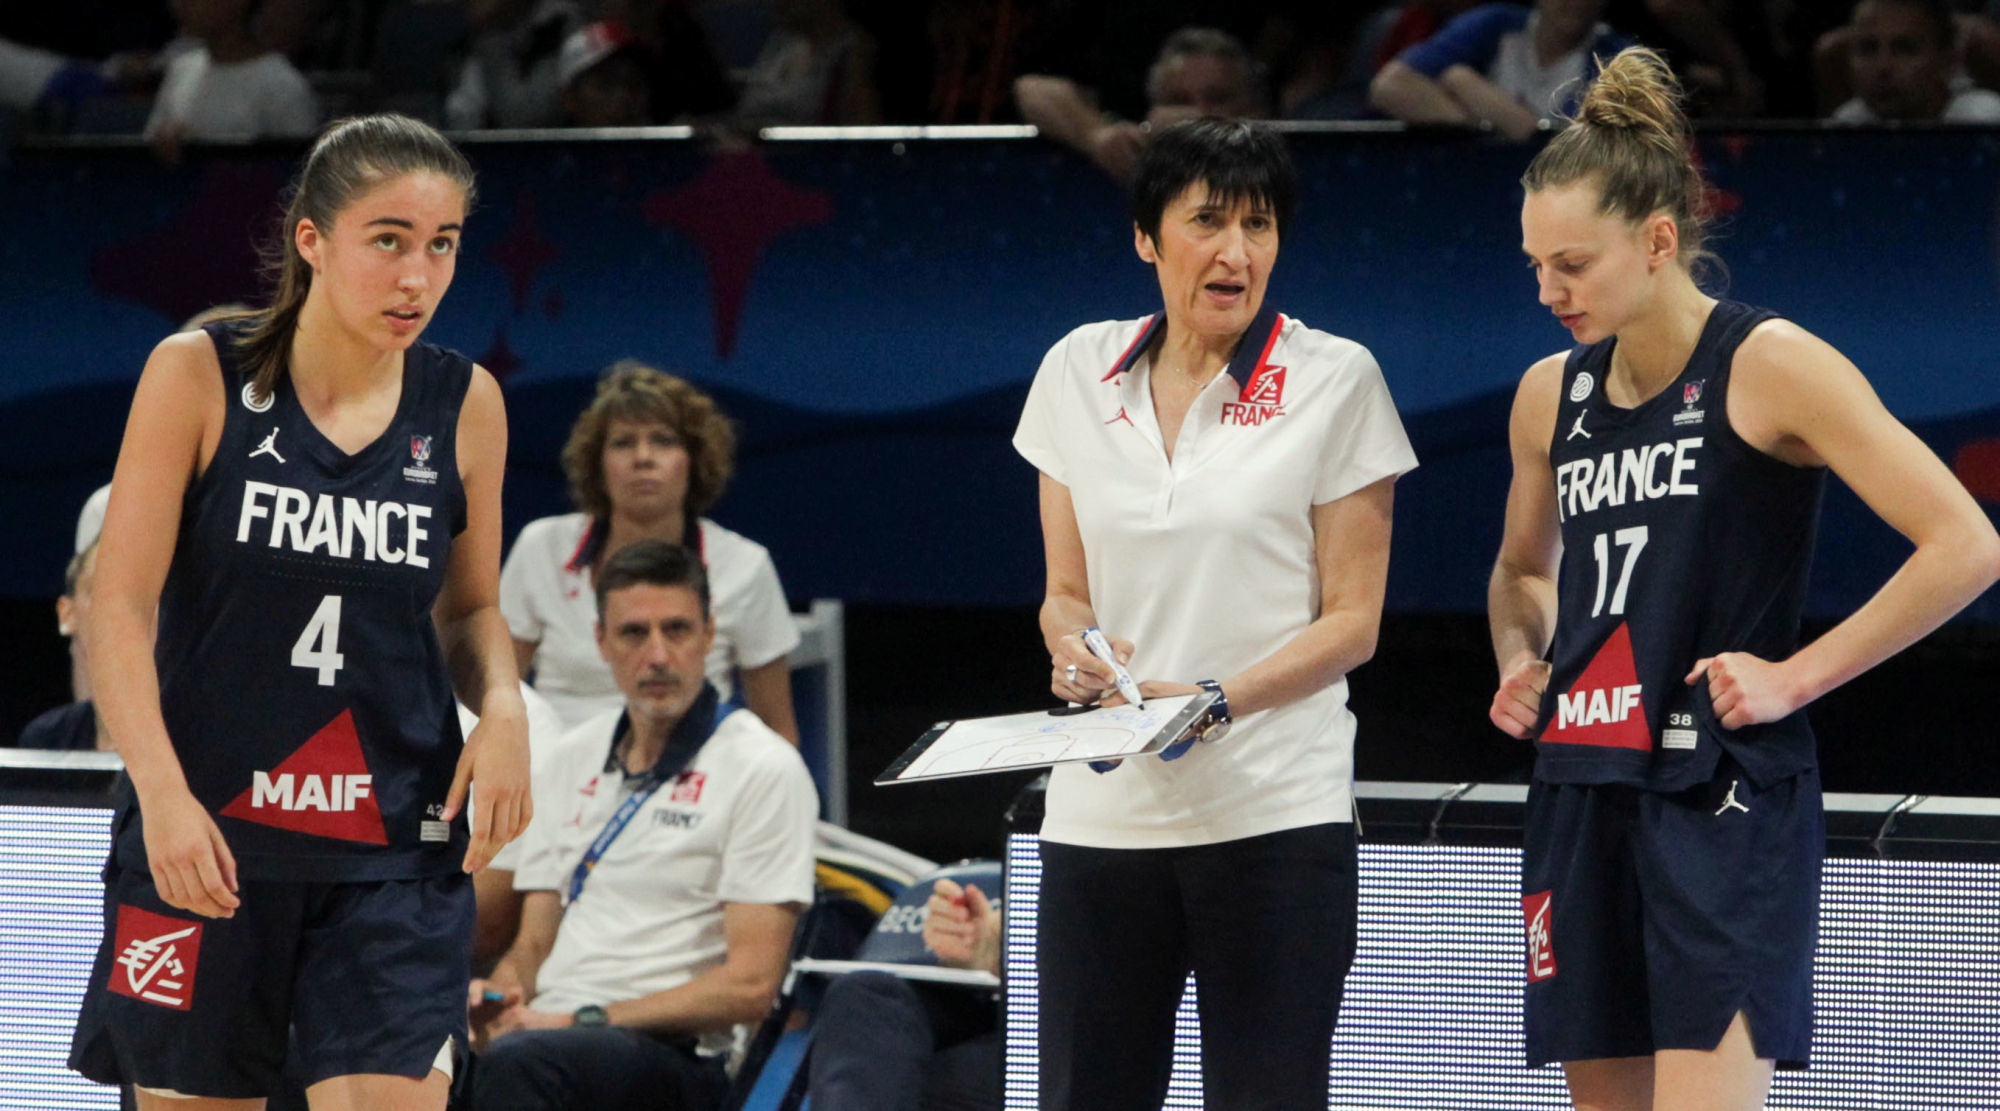 Marine Fauthoux, head coach Valerie Garnier and Marine Johannes of France during the Women's EuroBasket Final match between Spain and France, Belgrade, Serbia, on July 7th, 2019.
Photo : Aleksandar Djorovic / Icon Sport